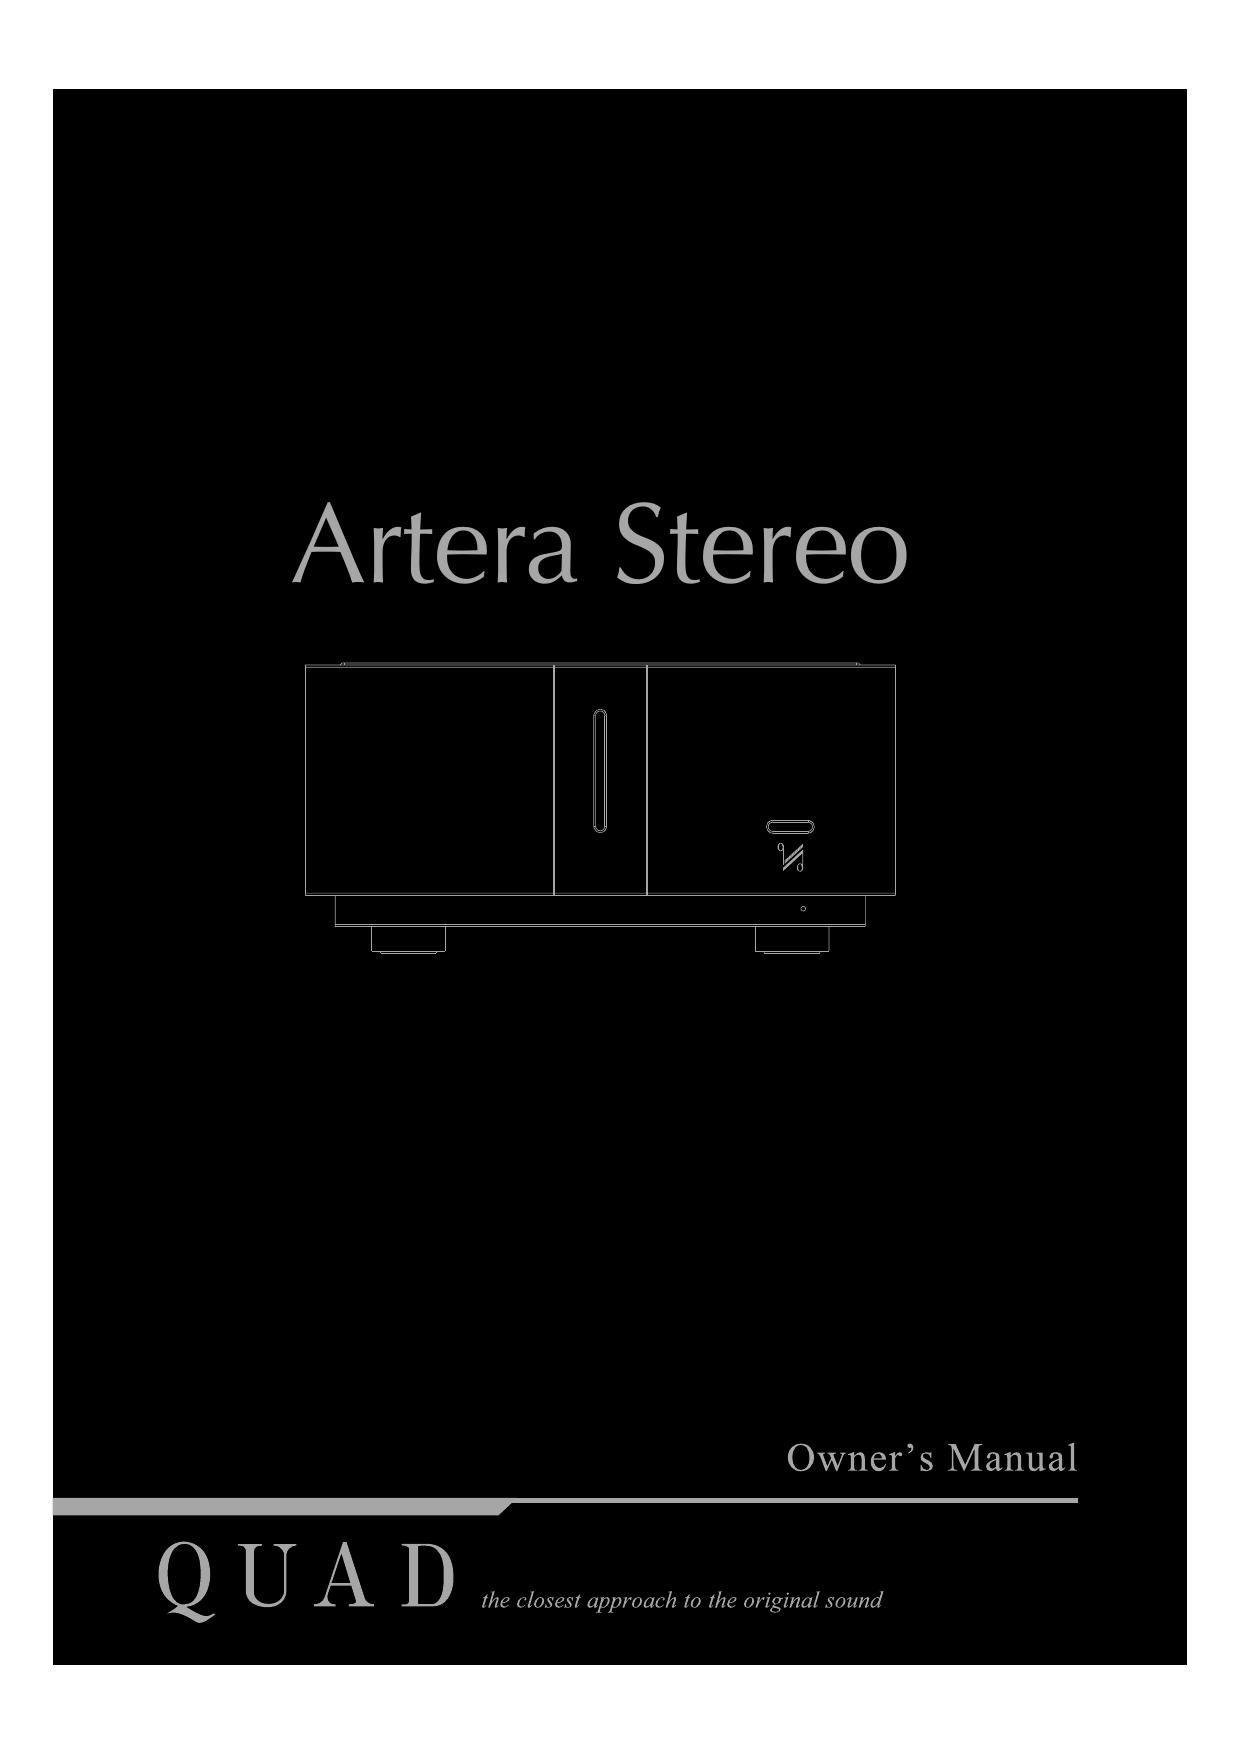 Quad Artera Stereo Owners Manual